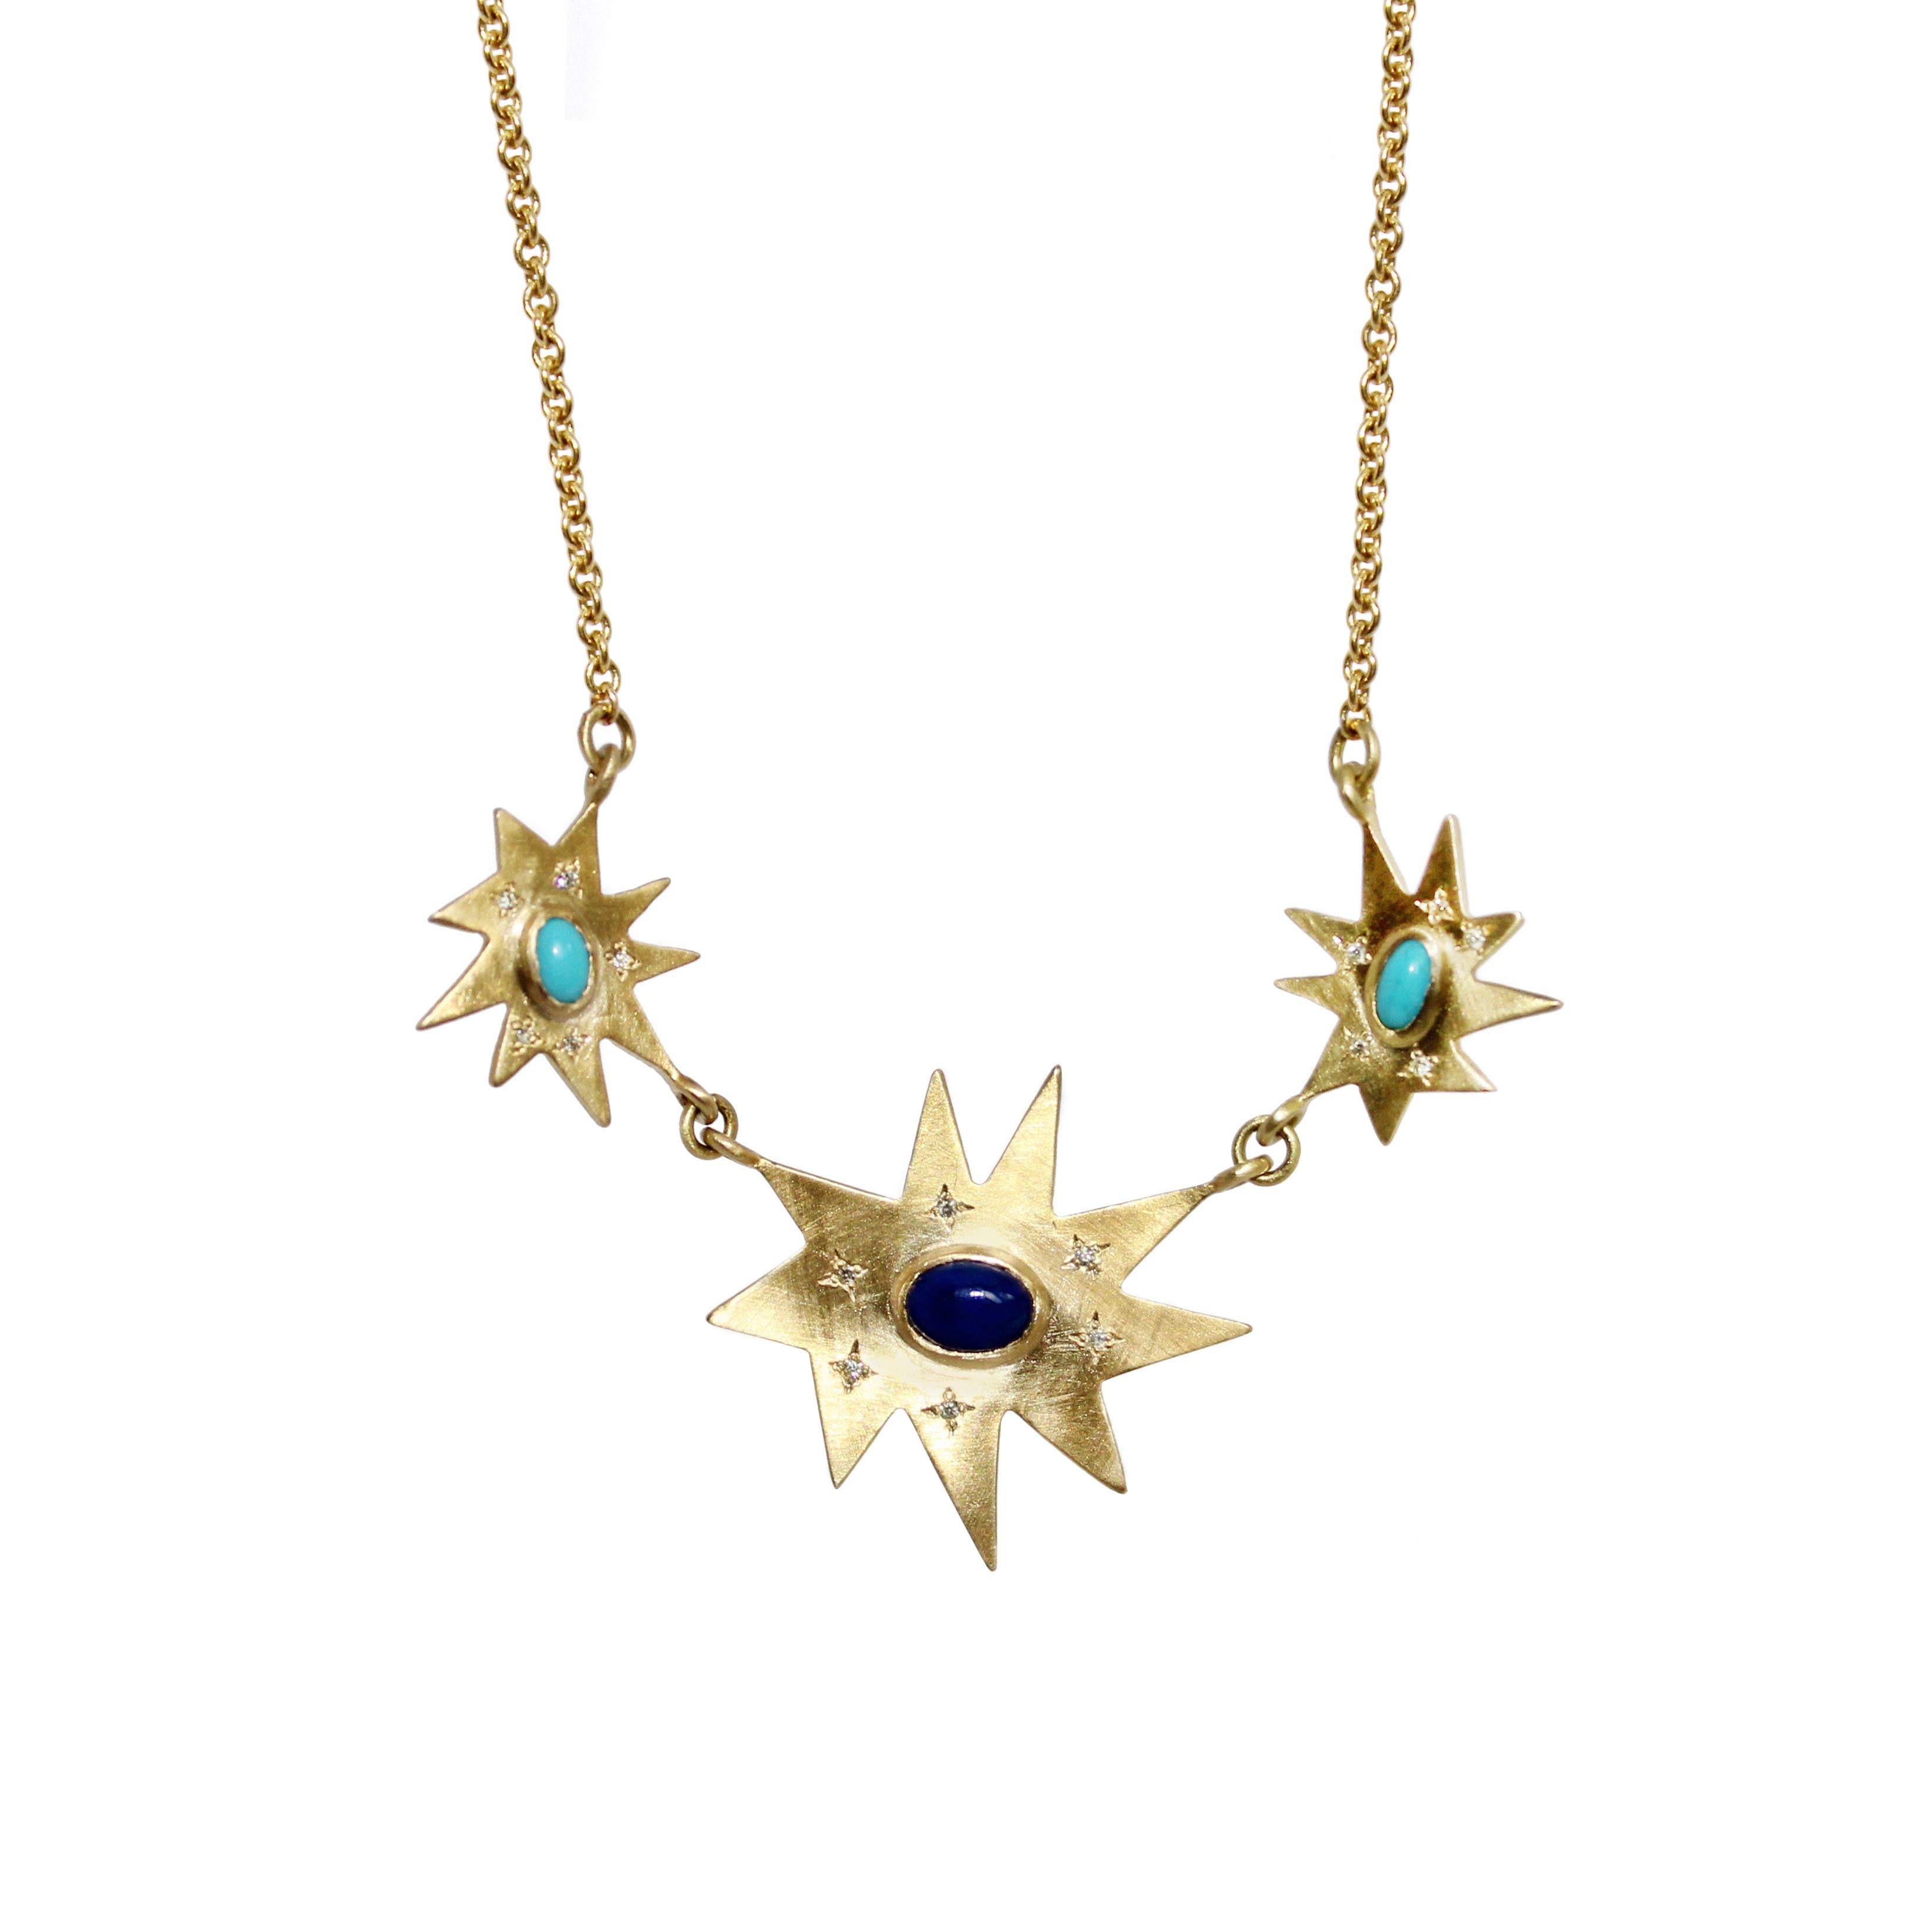 Emily Kuvin Gold, Diamond, Lapis and Turquoise Statement Necklace